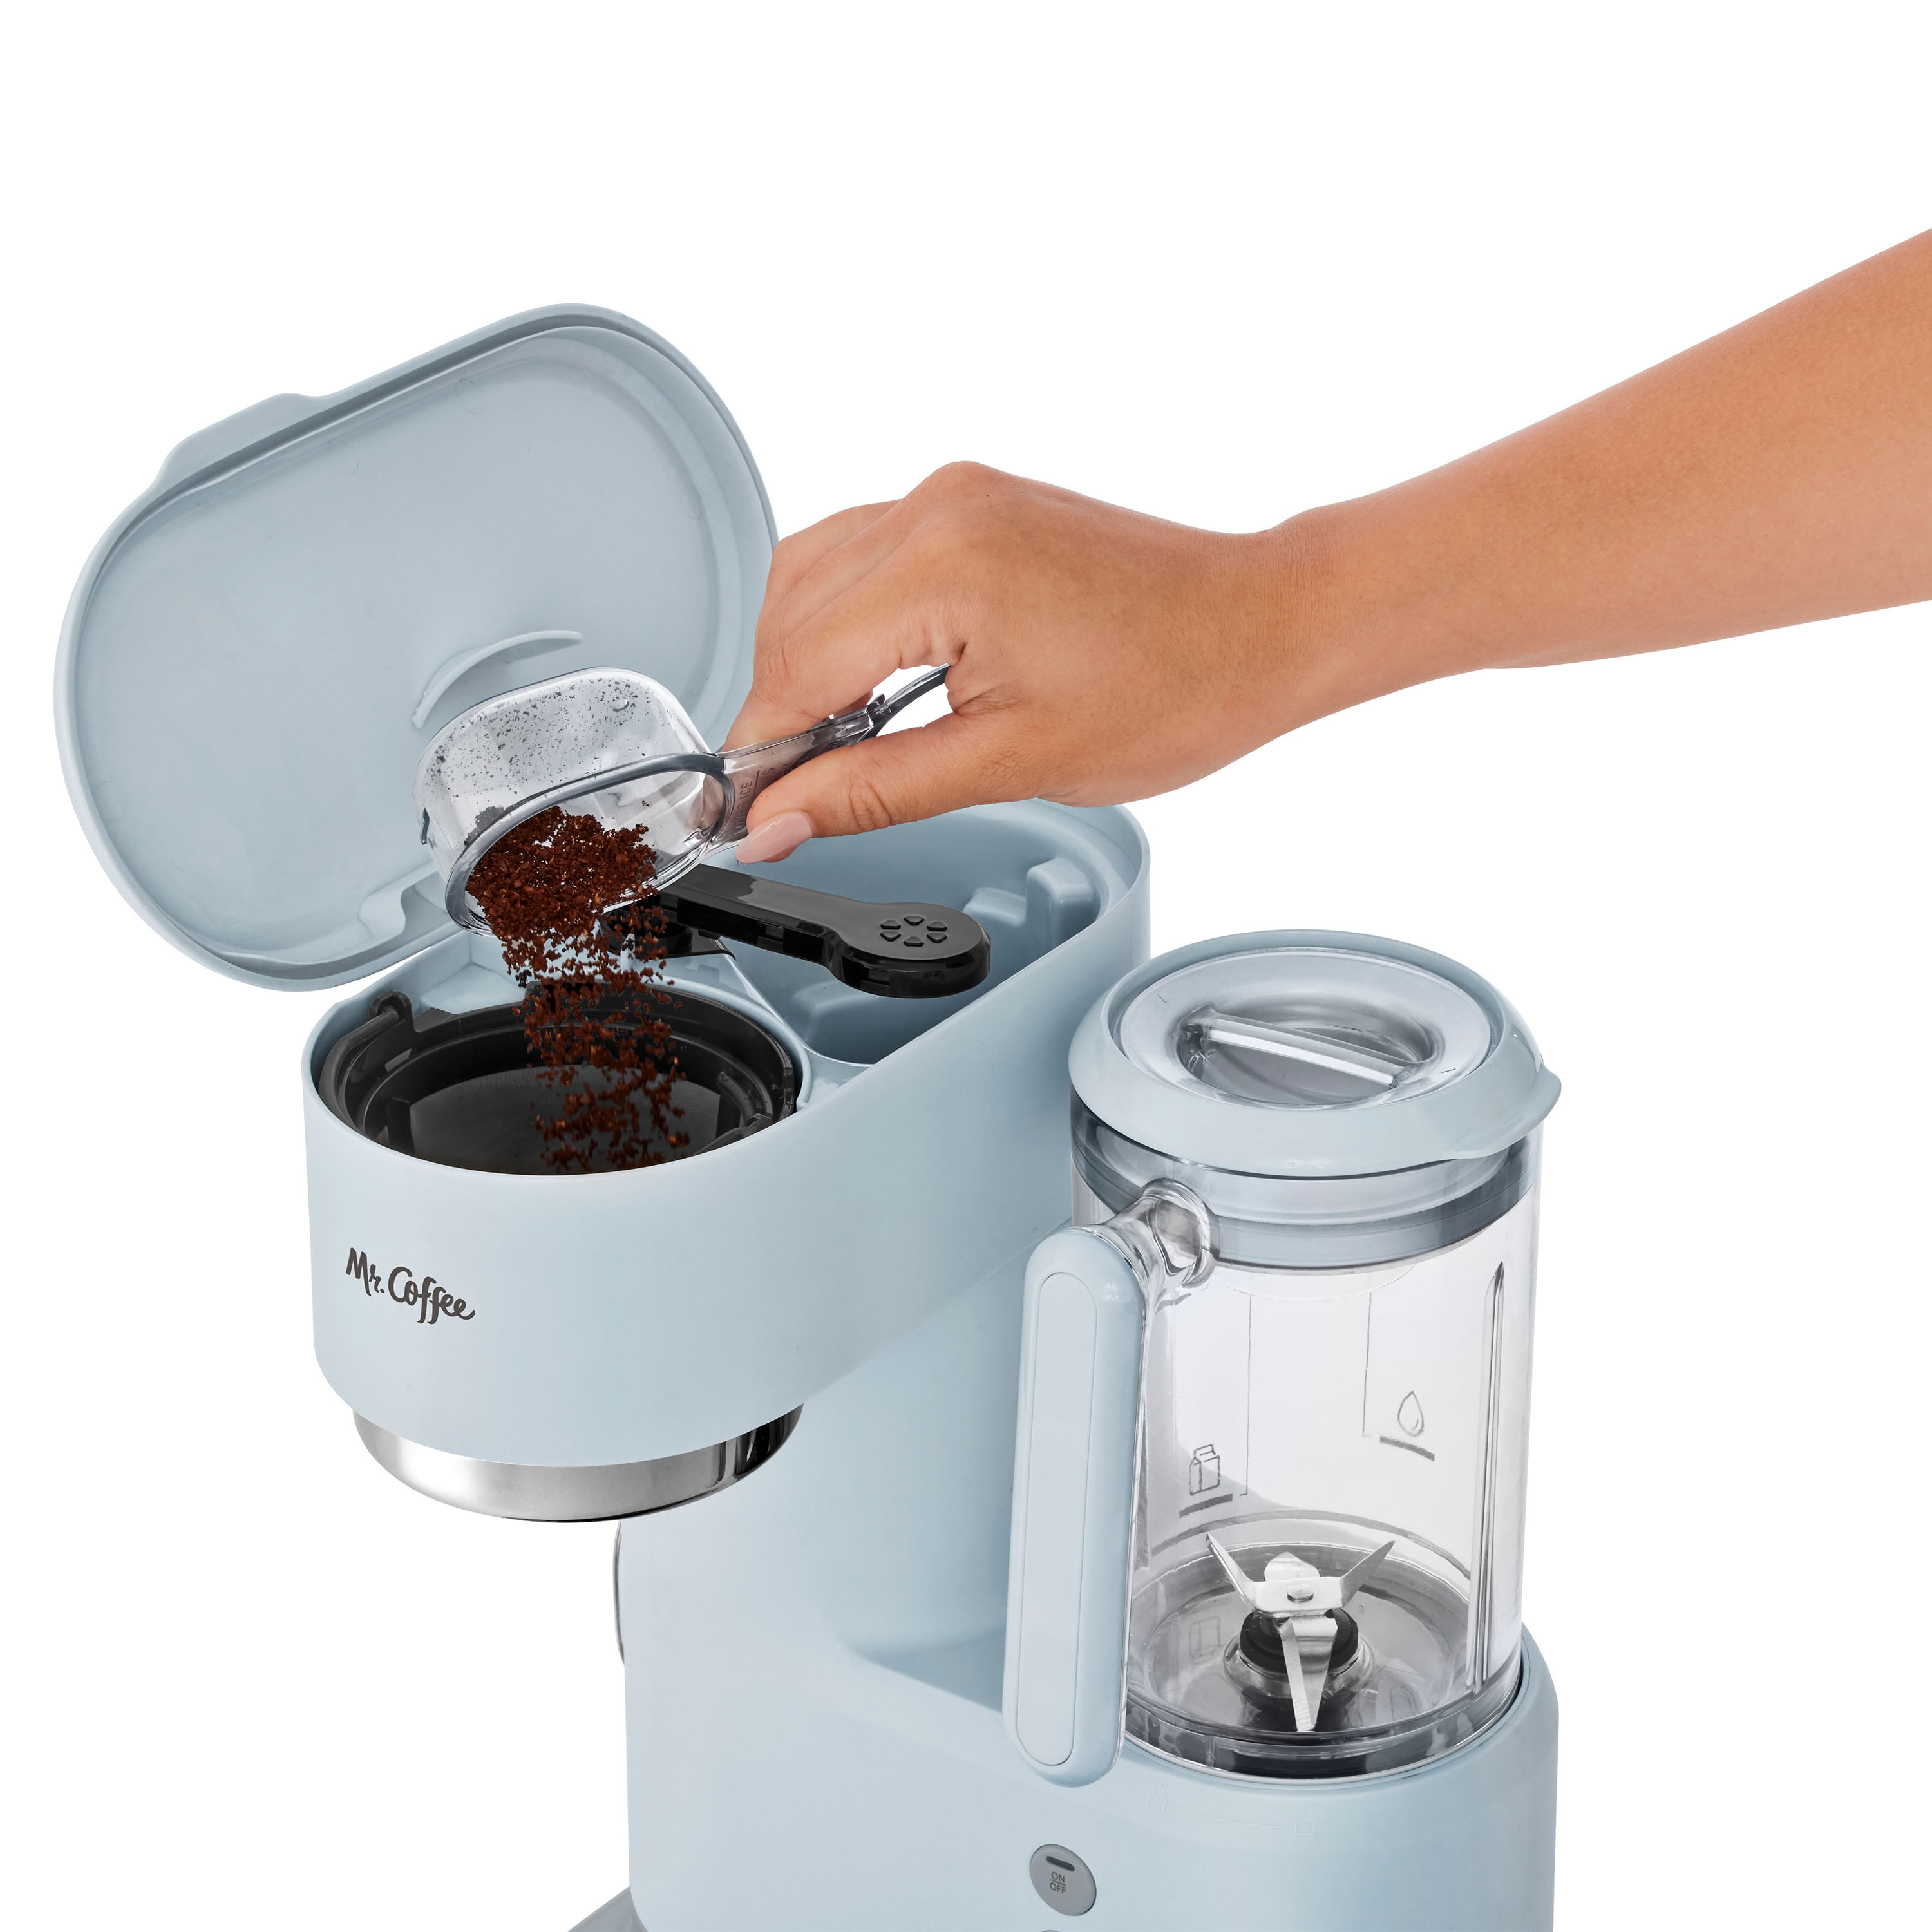 Mr. Coffee® Iced Coffee Maker - Burgundy, 1 ct - Fry's Food Stores